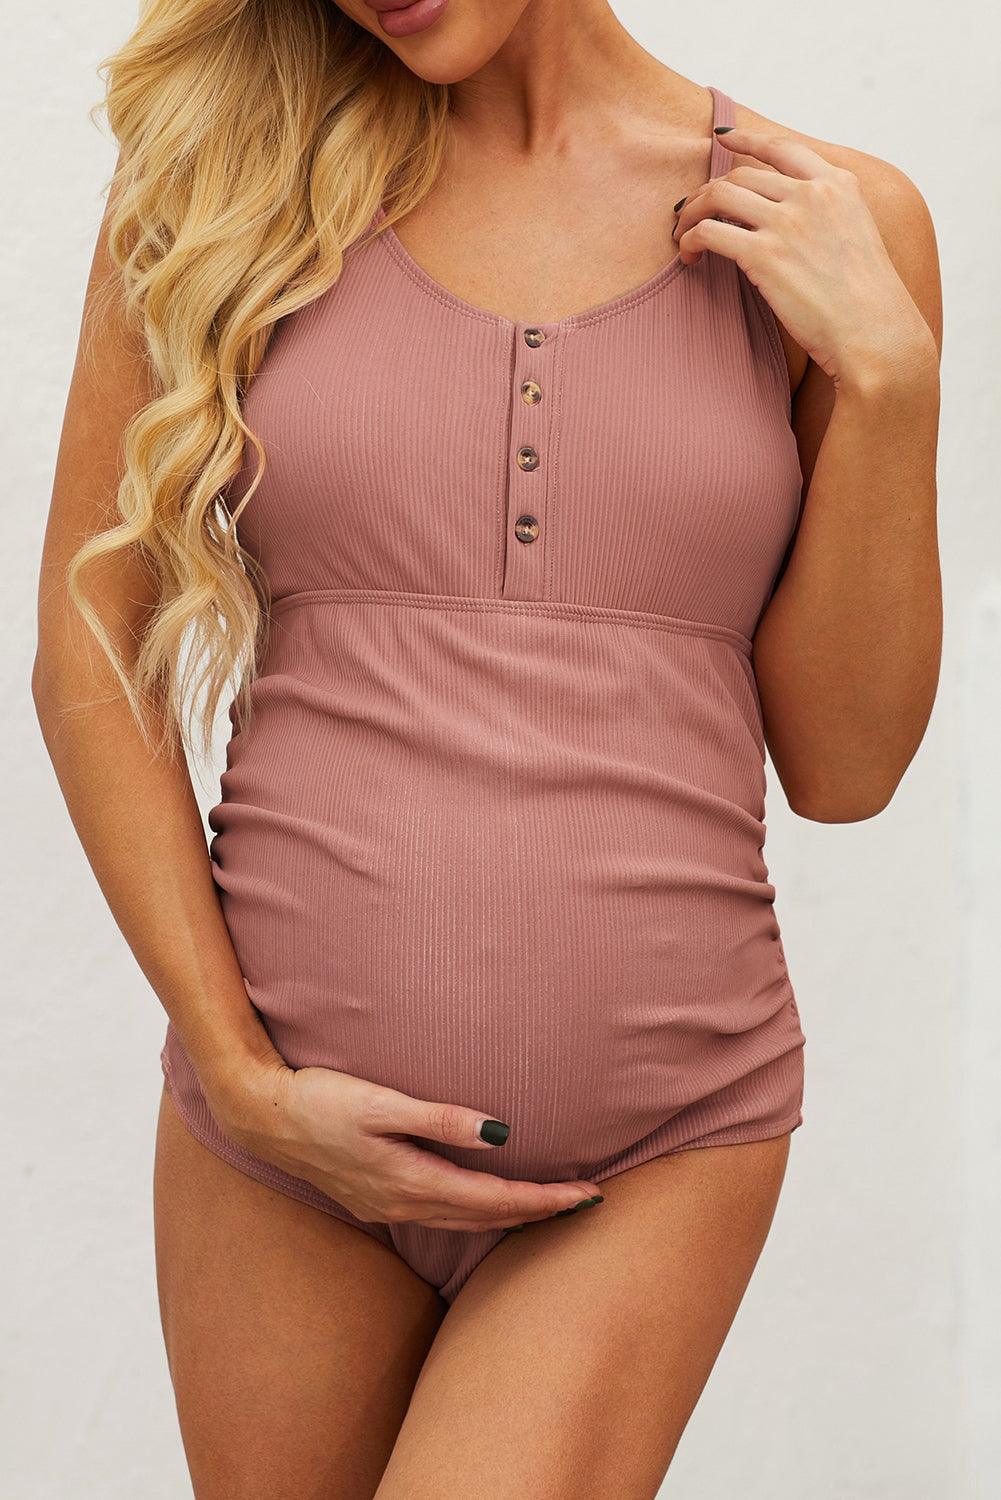 Ribbed Spaghetti Strap One-Piece Maternity Swimsuit - Closet of Ren